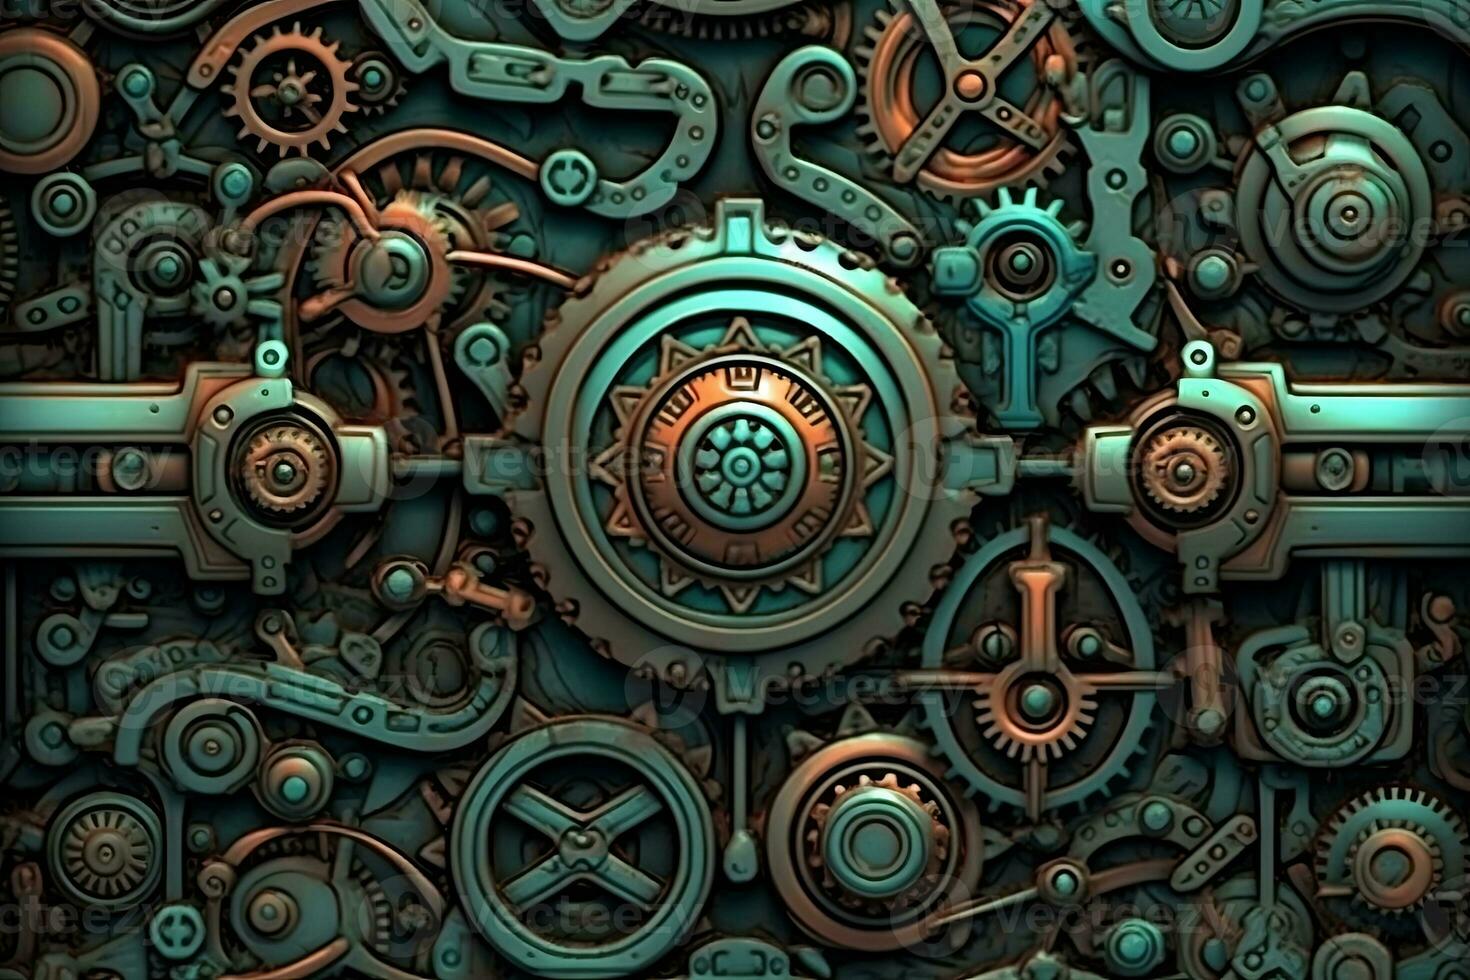 A background of mechanical gears and cogs in a steampunk style - Steampunk